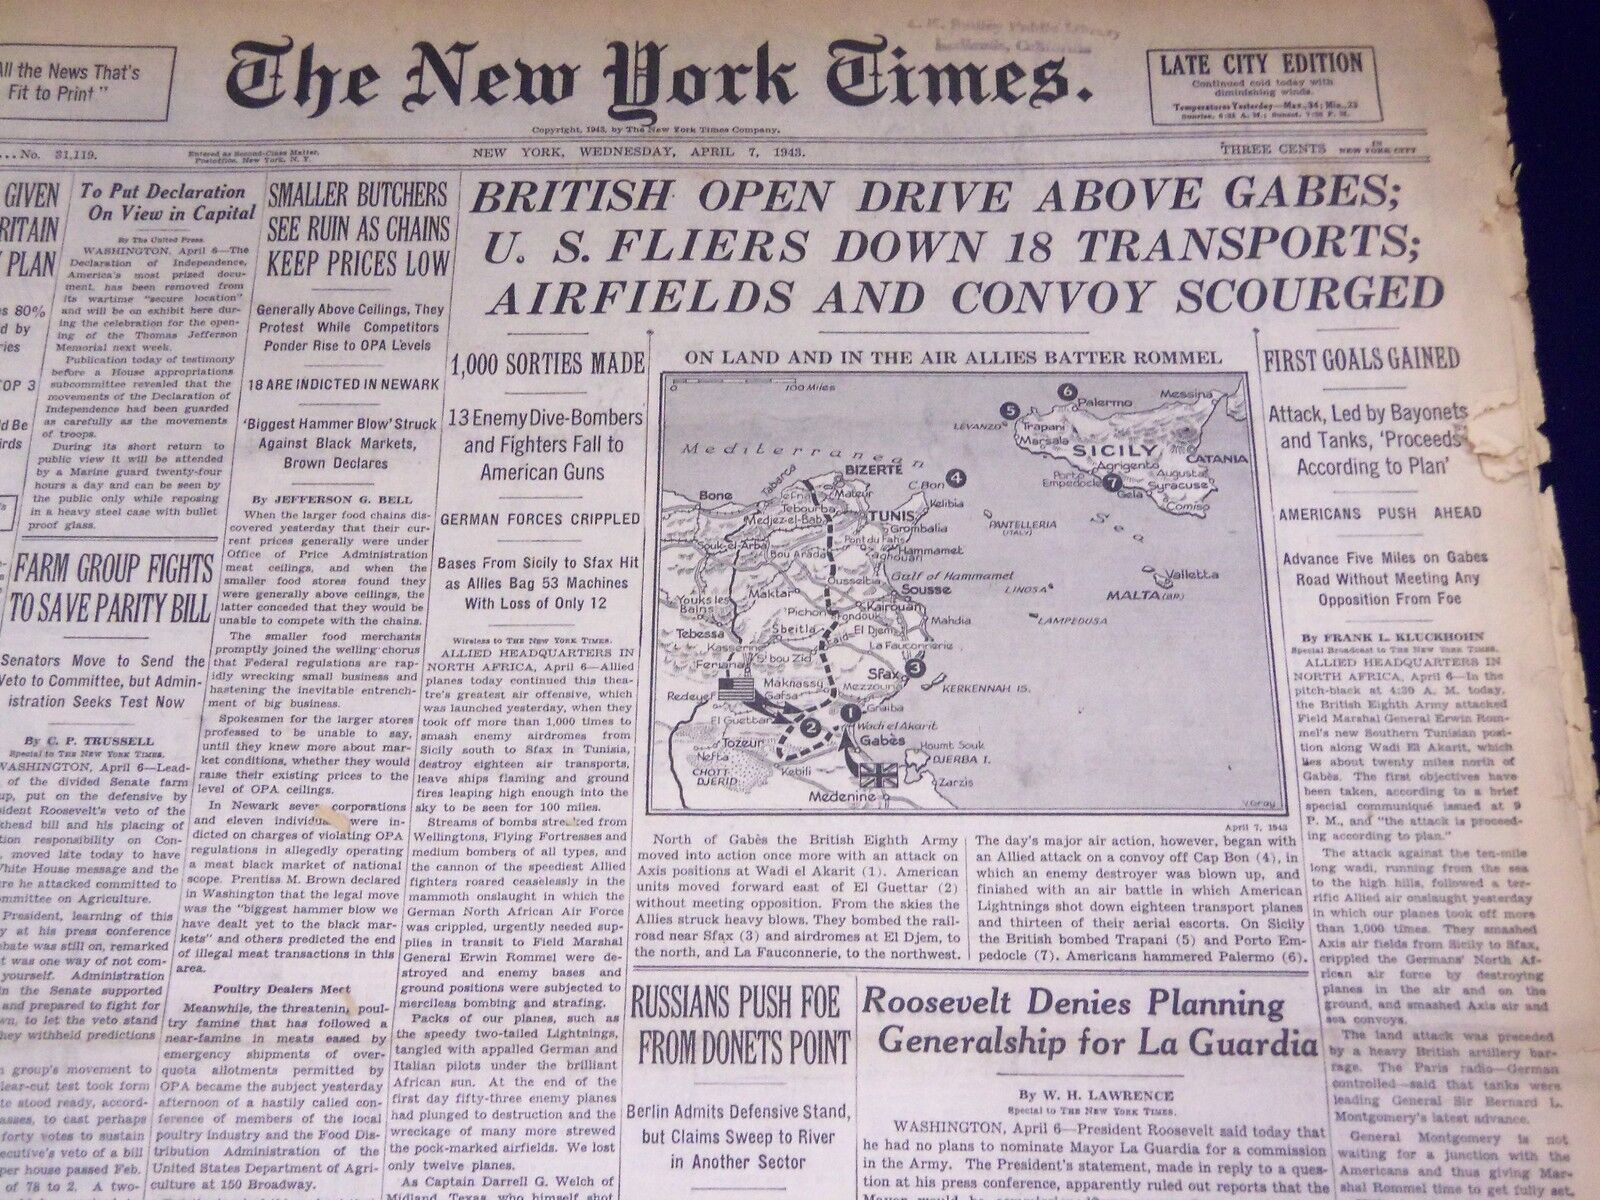 1943 APRIL 7 NEW YORK TIMES - BRITISH OPEN DRIVE ABOVE GABES - NT 1894